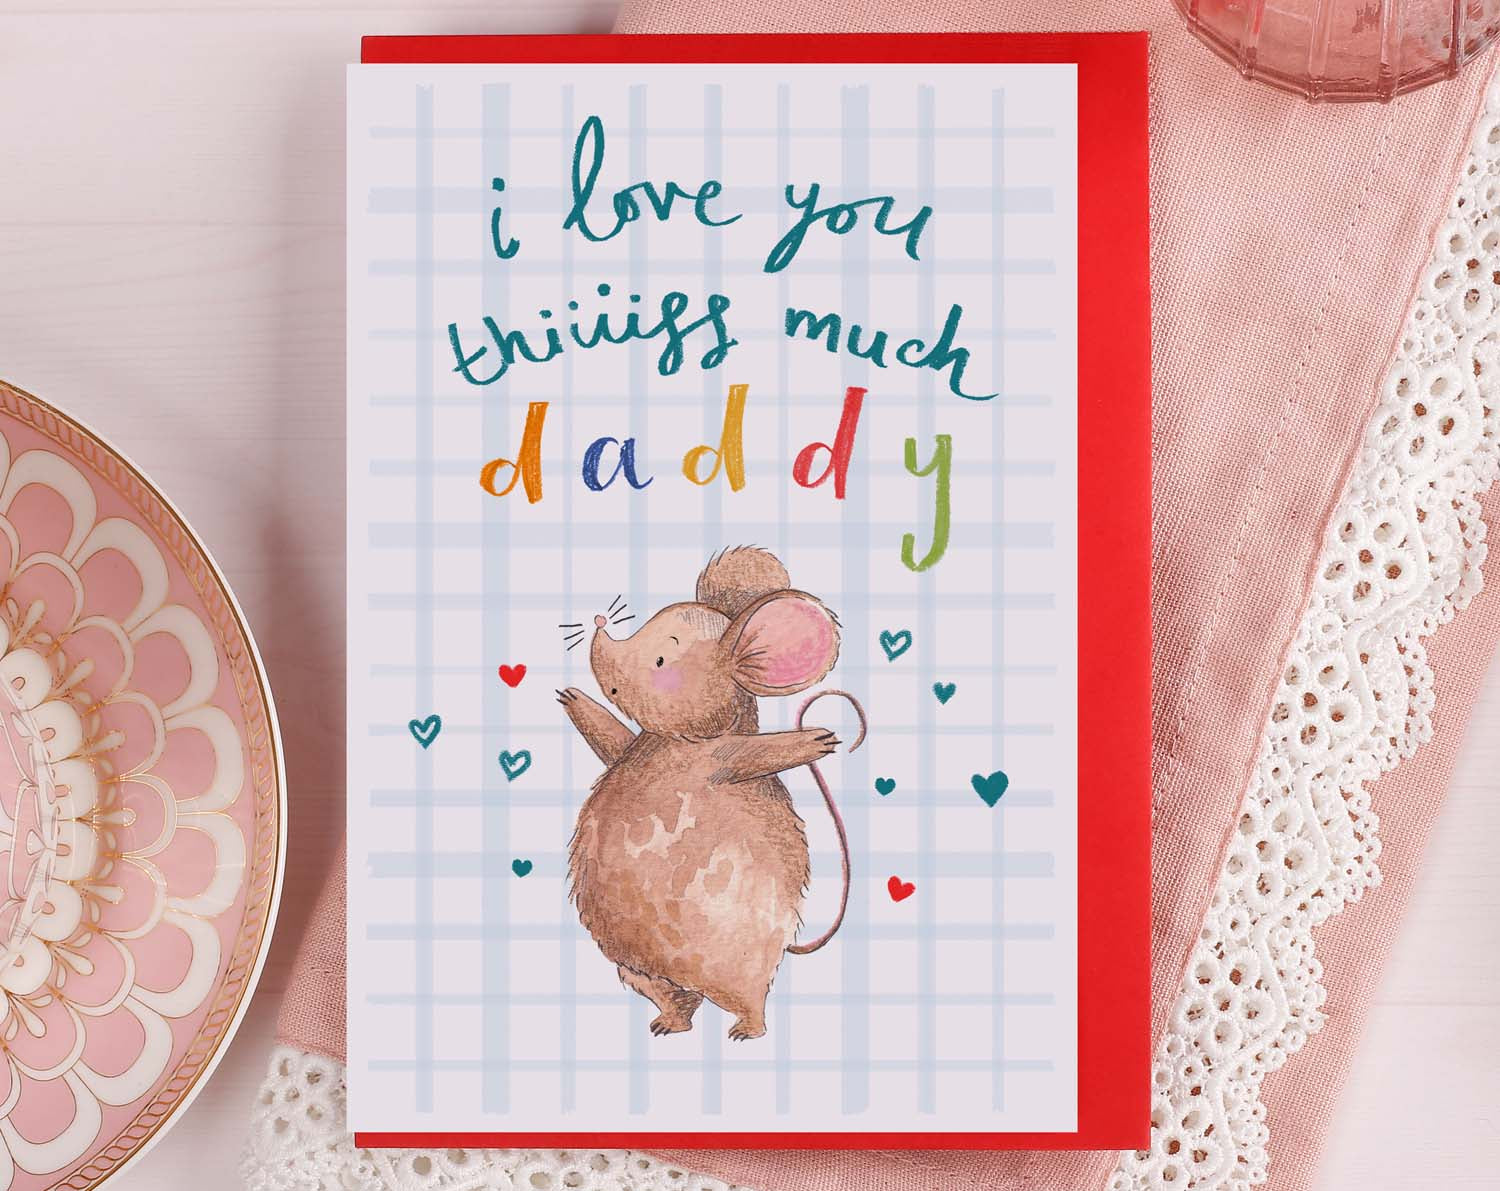 40 Heartfelt Messages for Father's Day Cards